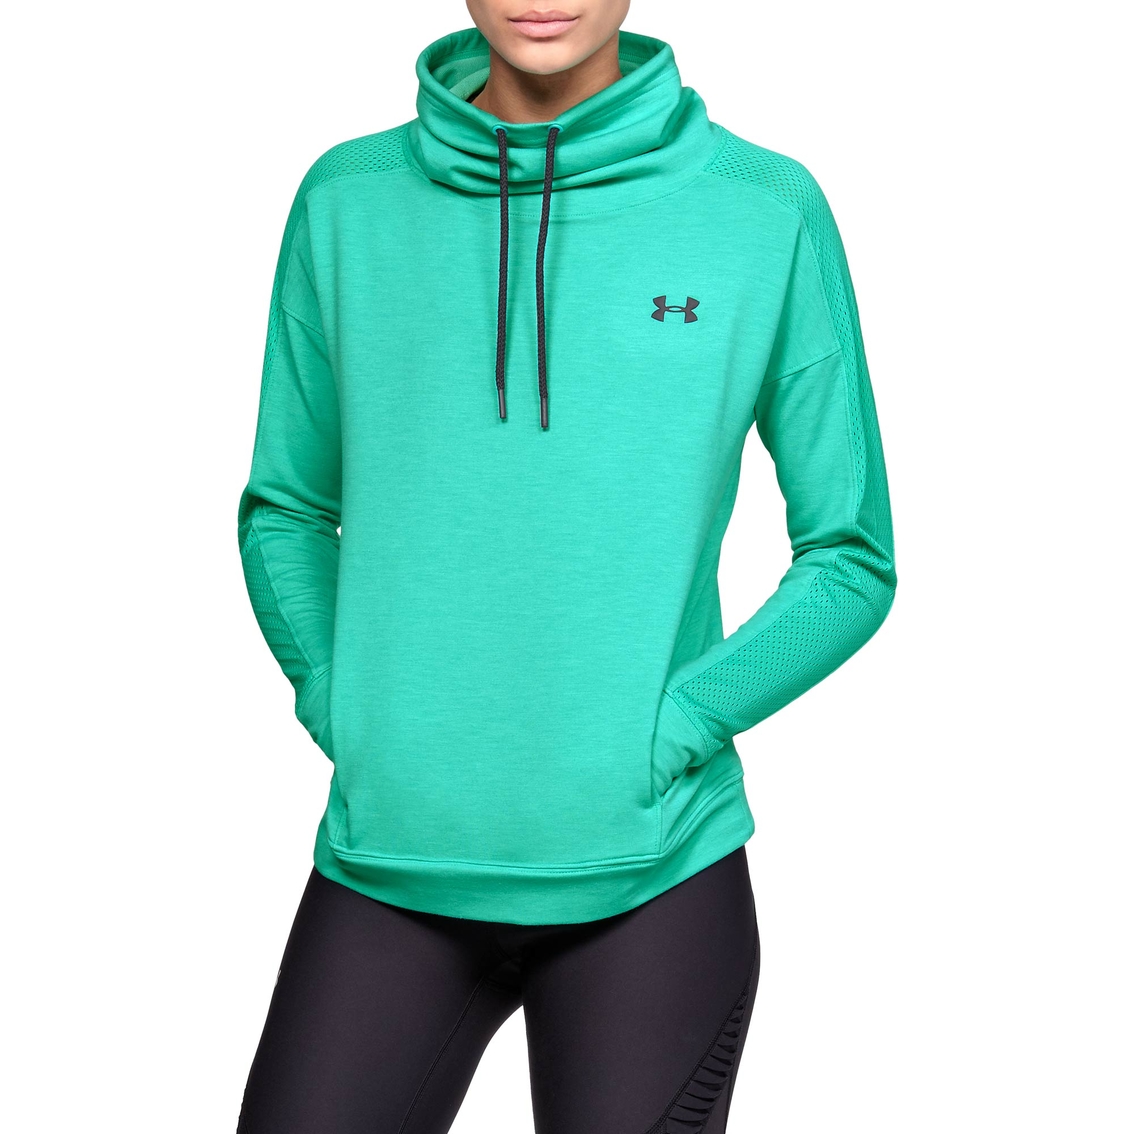 Under Armour Featherweight Funnel Neck Fleece - Image 3 of 5